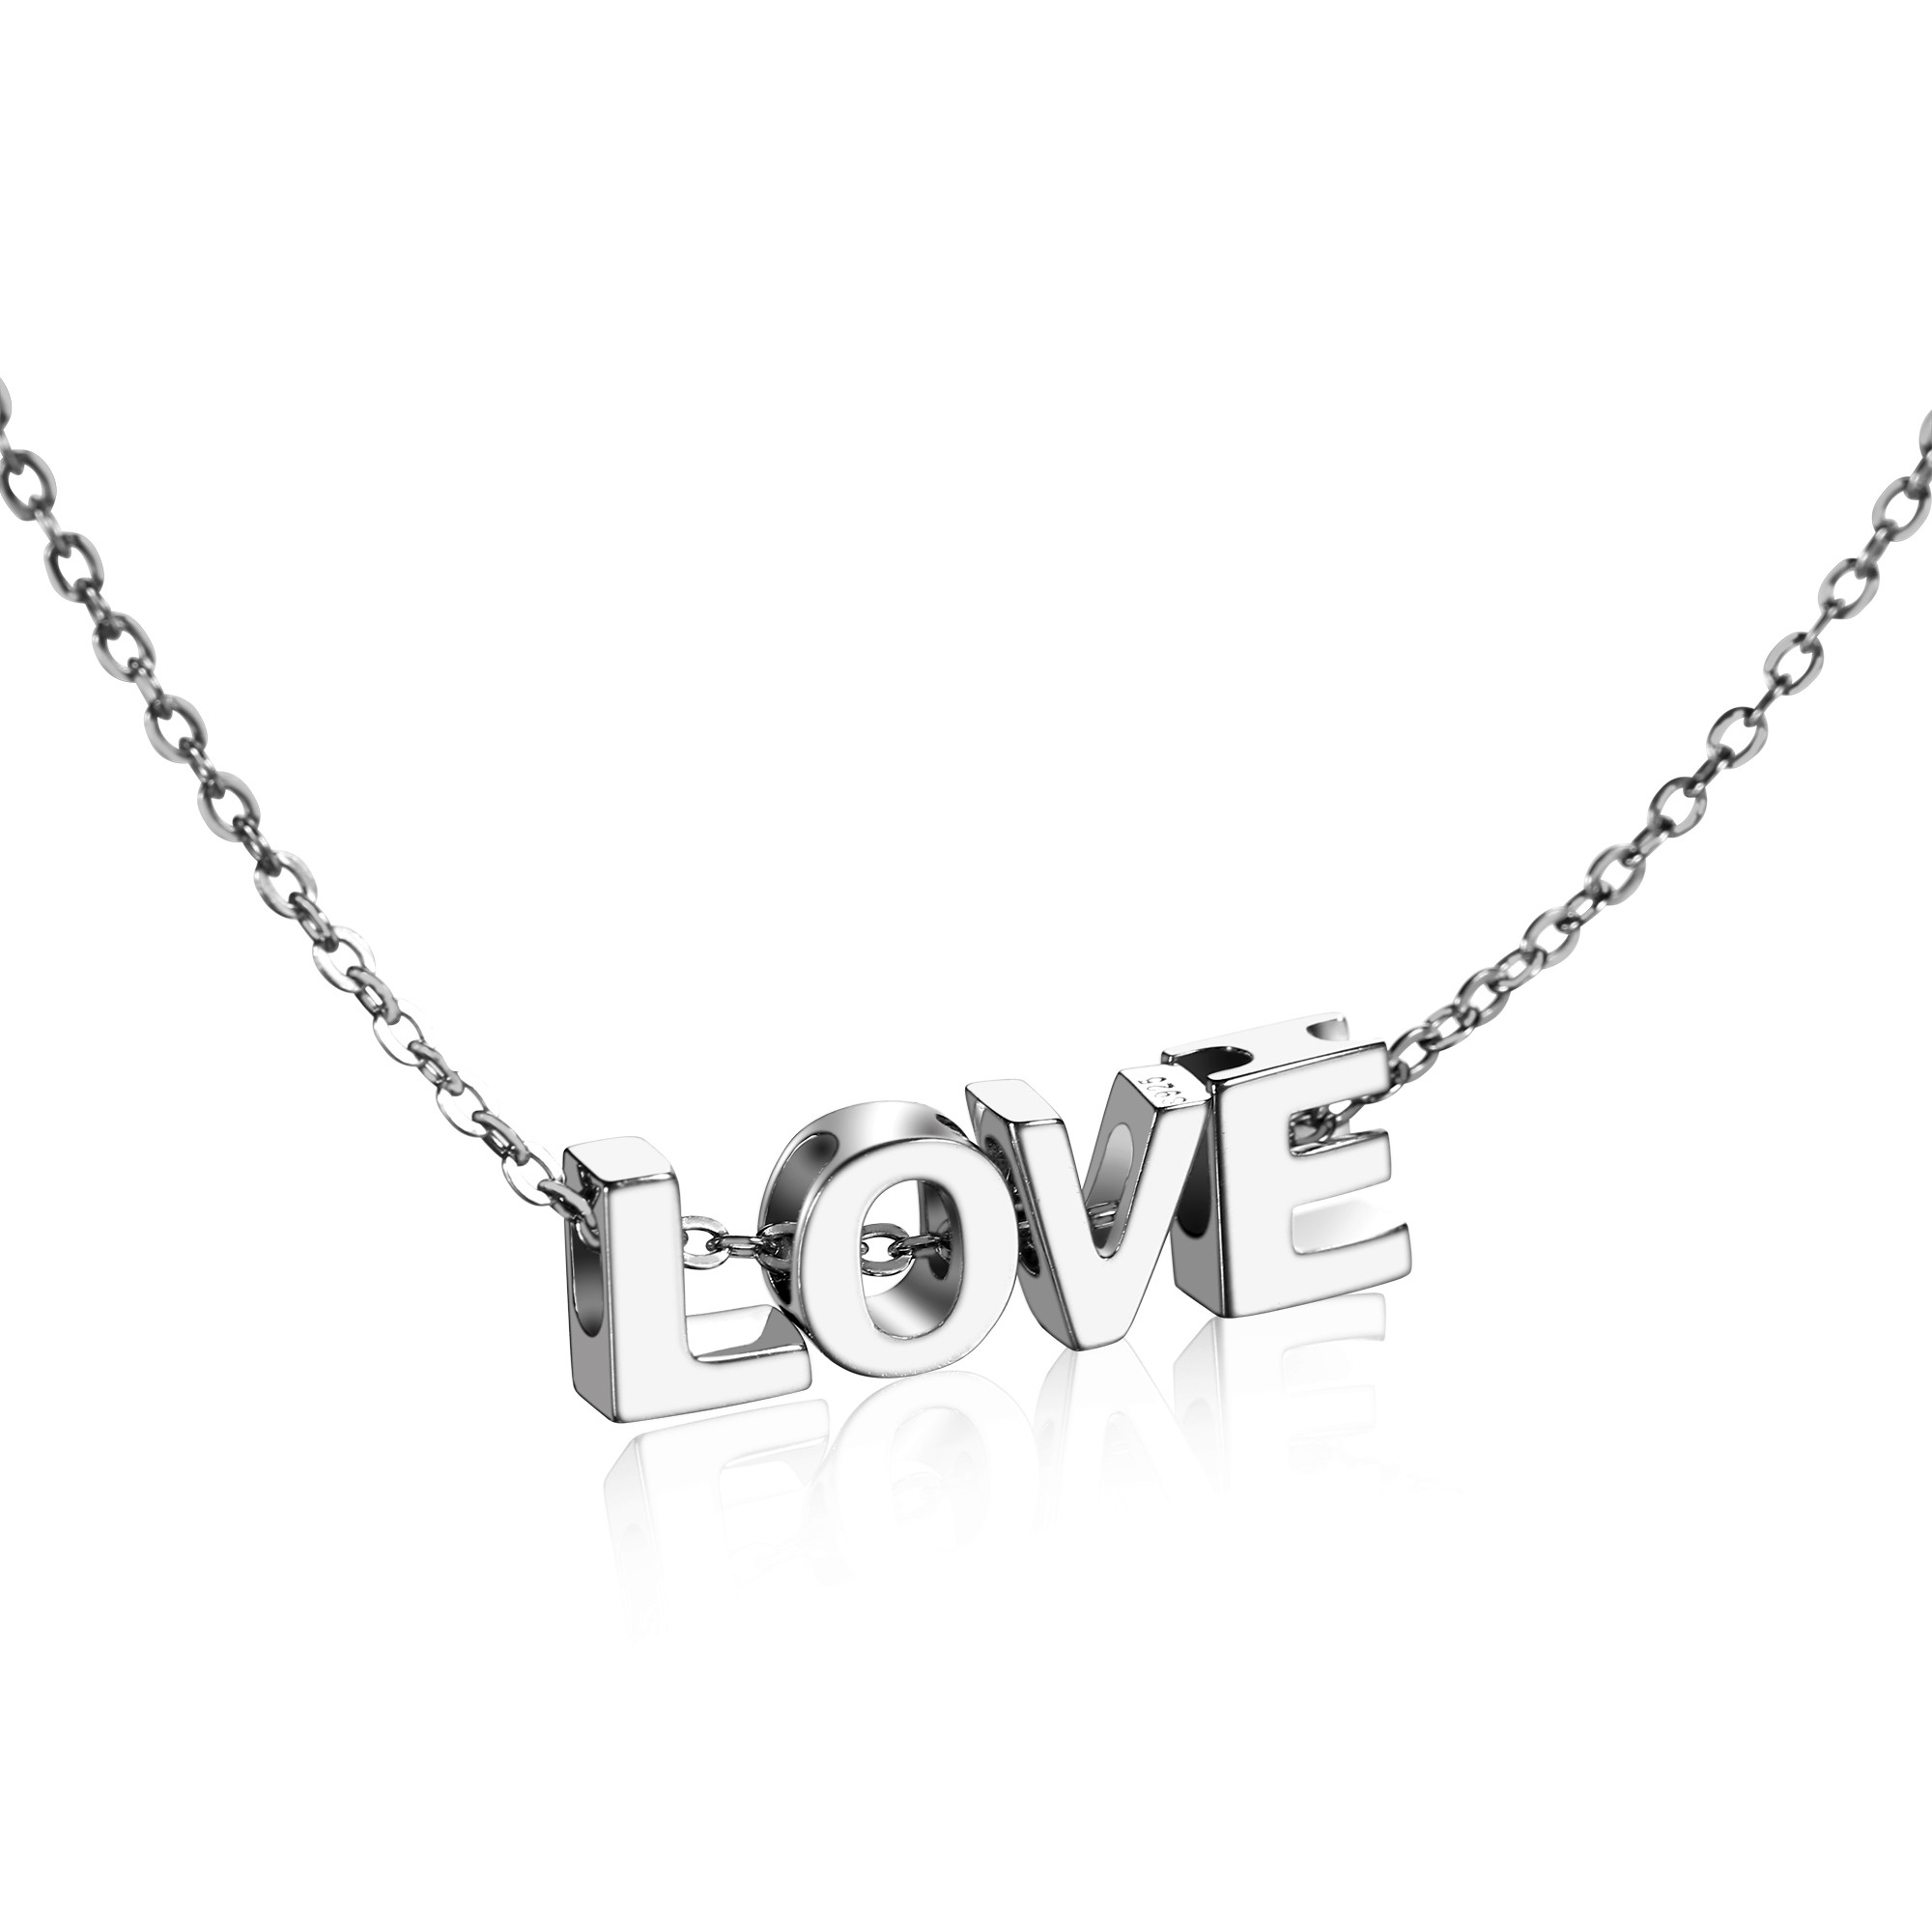 Personalized Custom Initials and Letters Necklace 925 Sterling Silver Rhodium Plated Jewelry